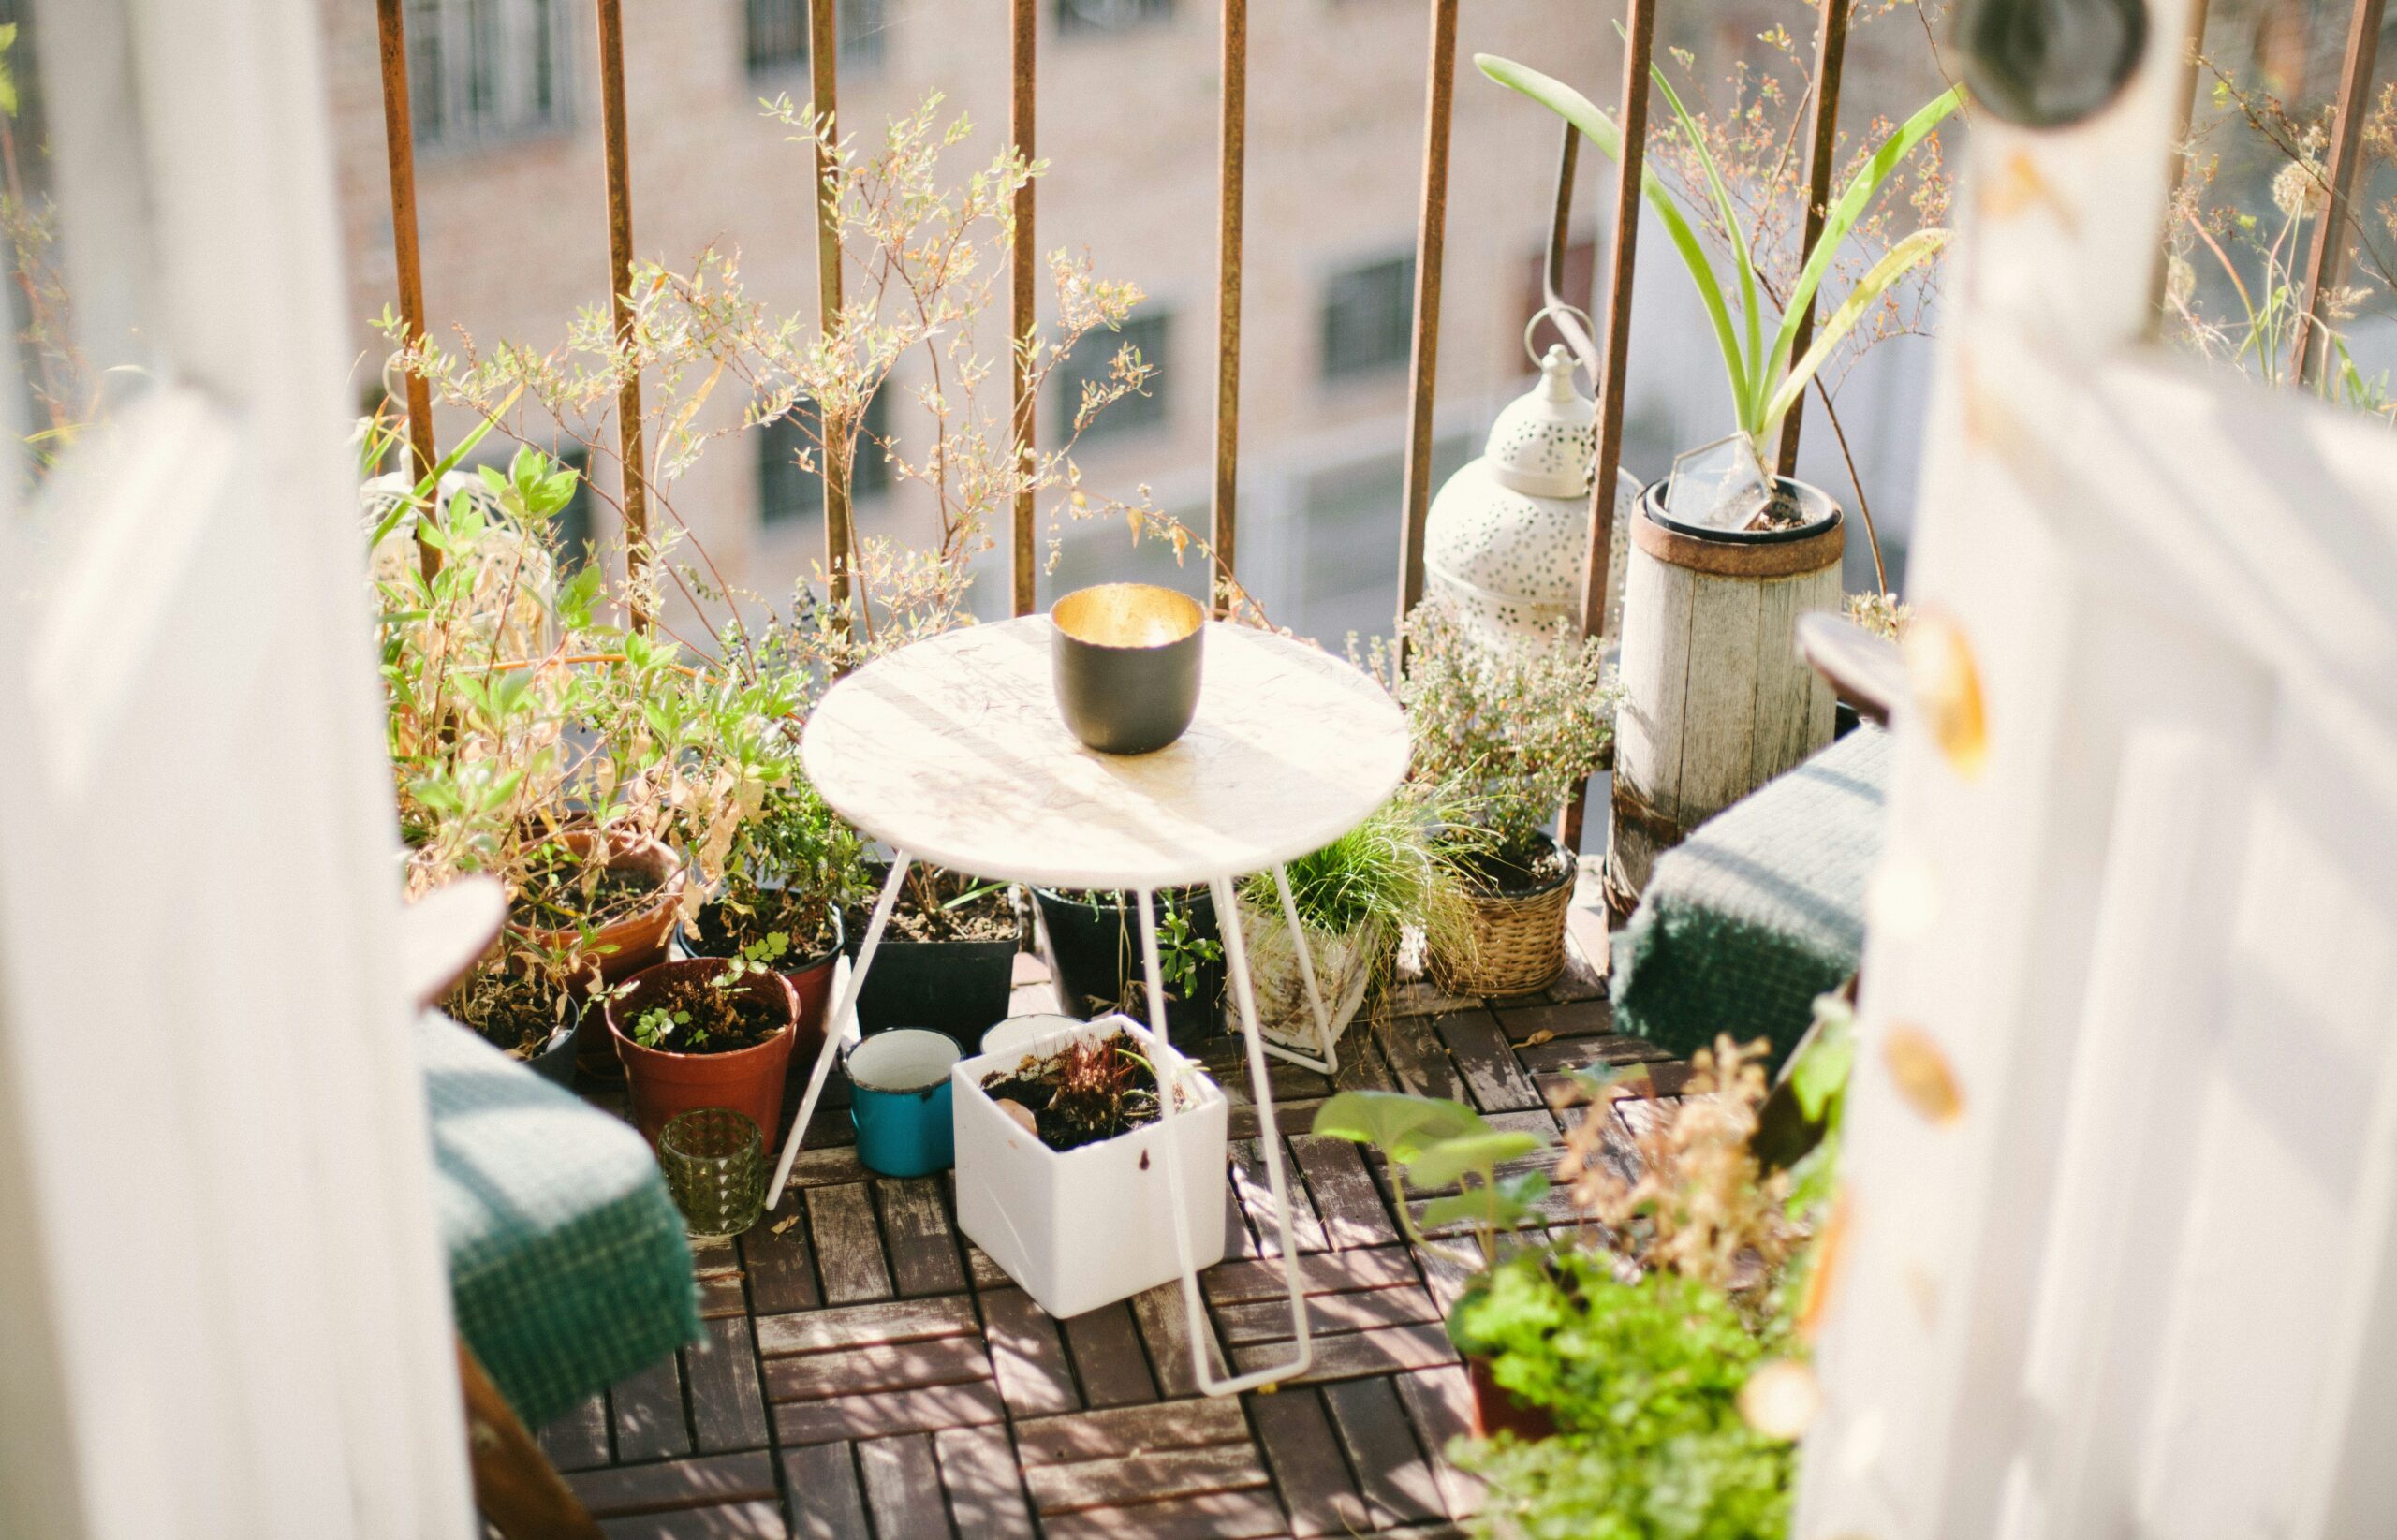 Small Space Solutions: Compact and Multifunctional Garden Furniture for Urban Gardens Festival Outlets - Buy Best Home Decor Fabrics in Australia